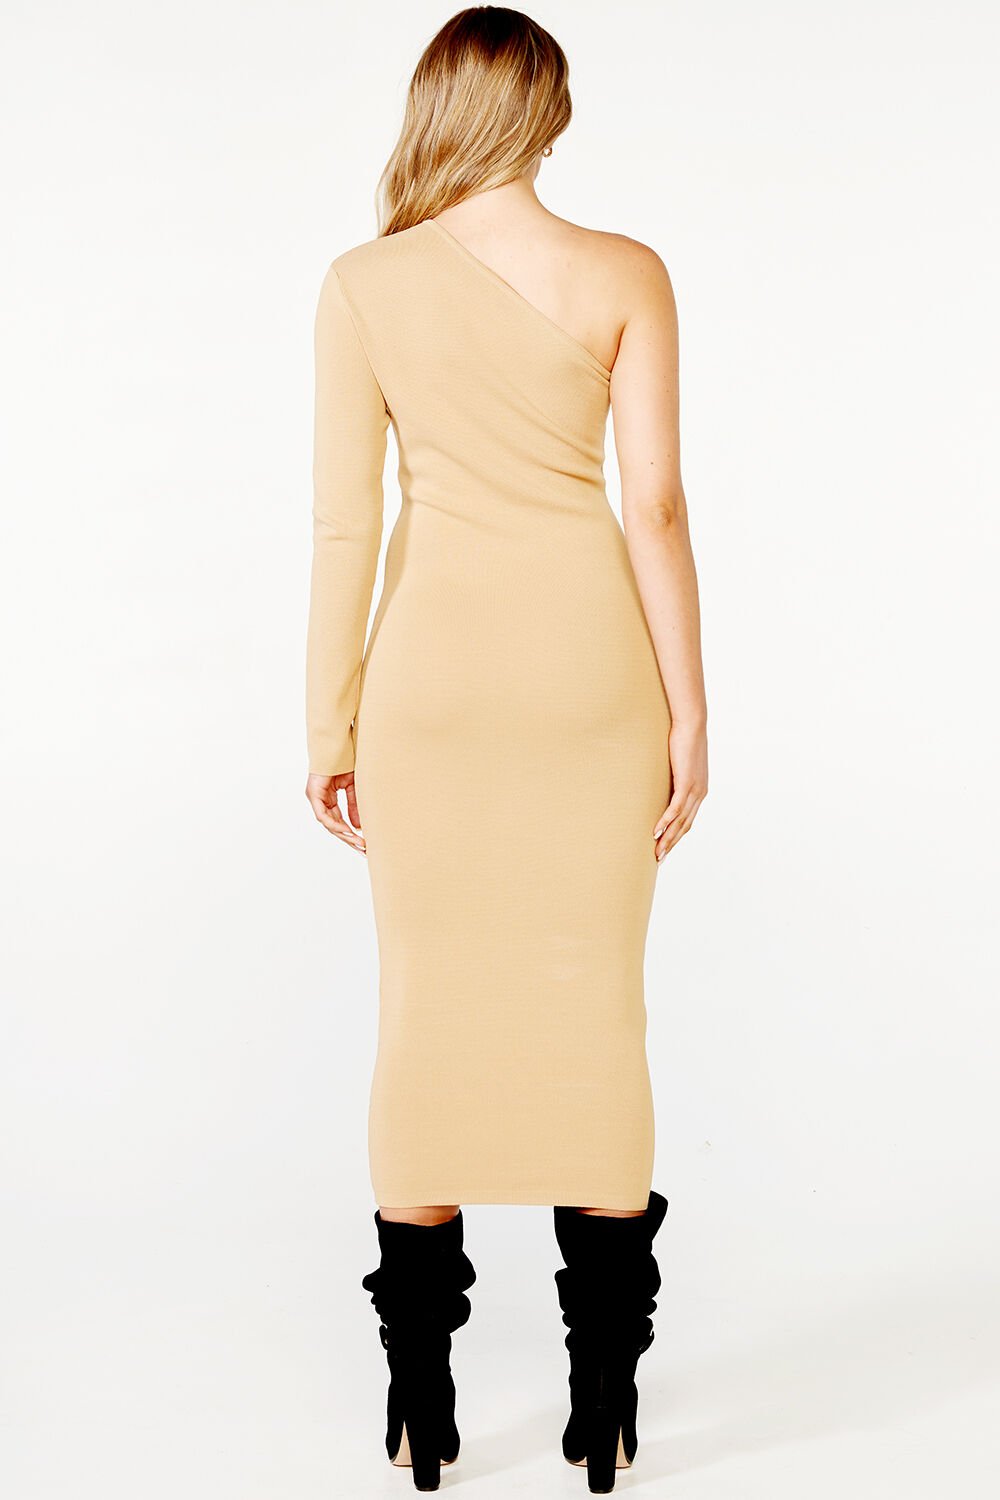 ONE SHOULDER KNIT DRESS in colour TAN